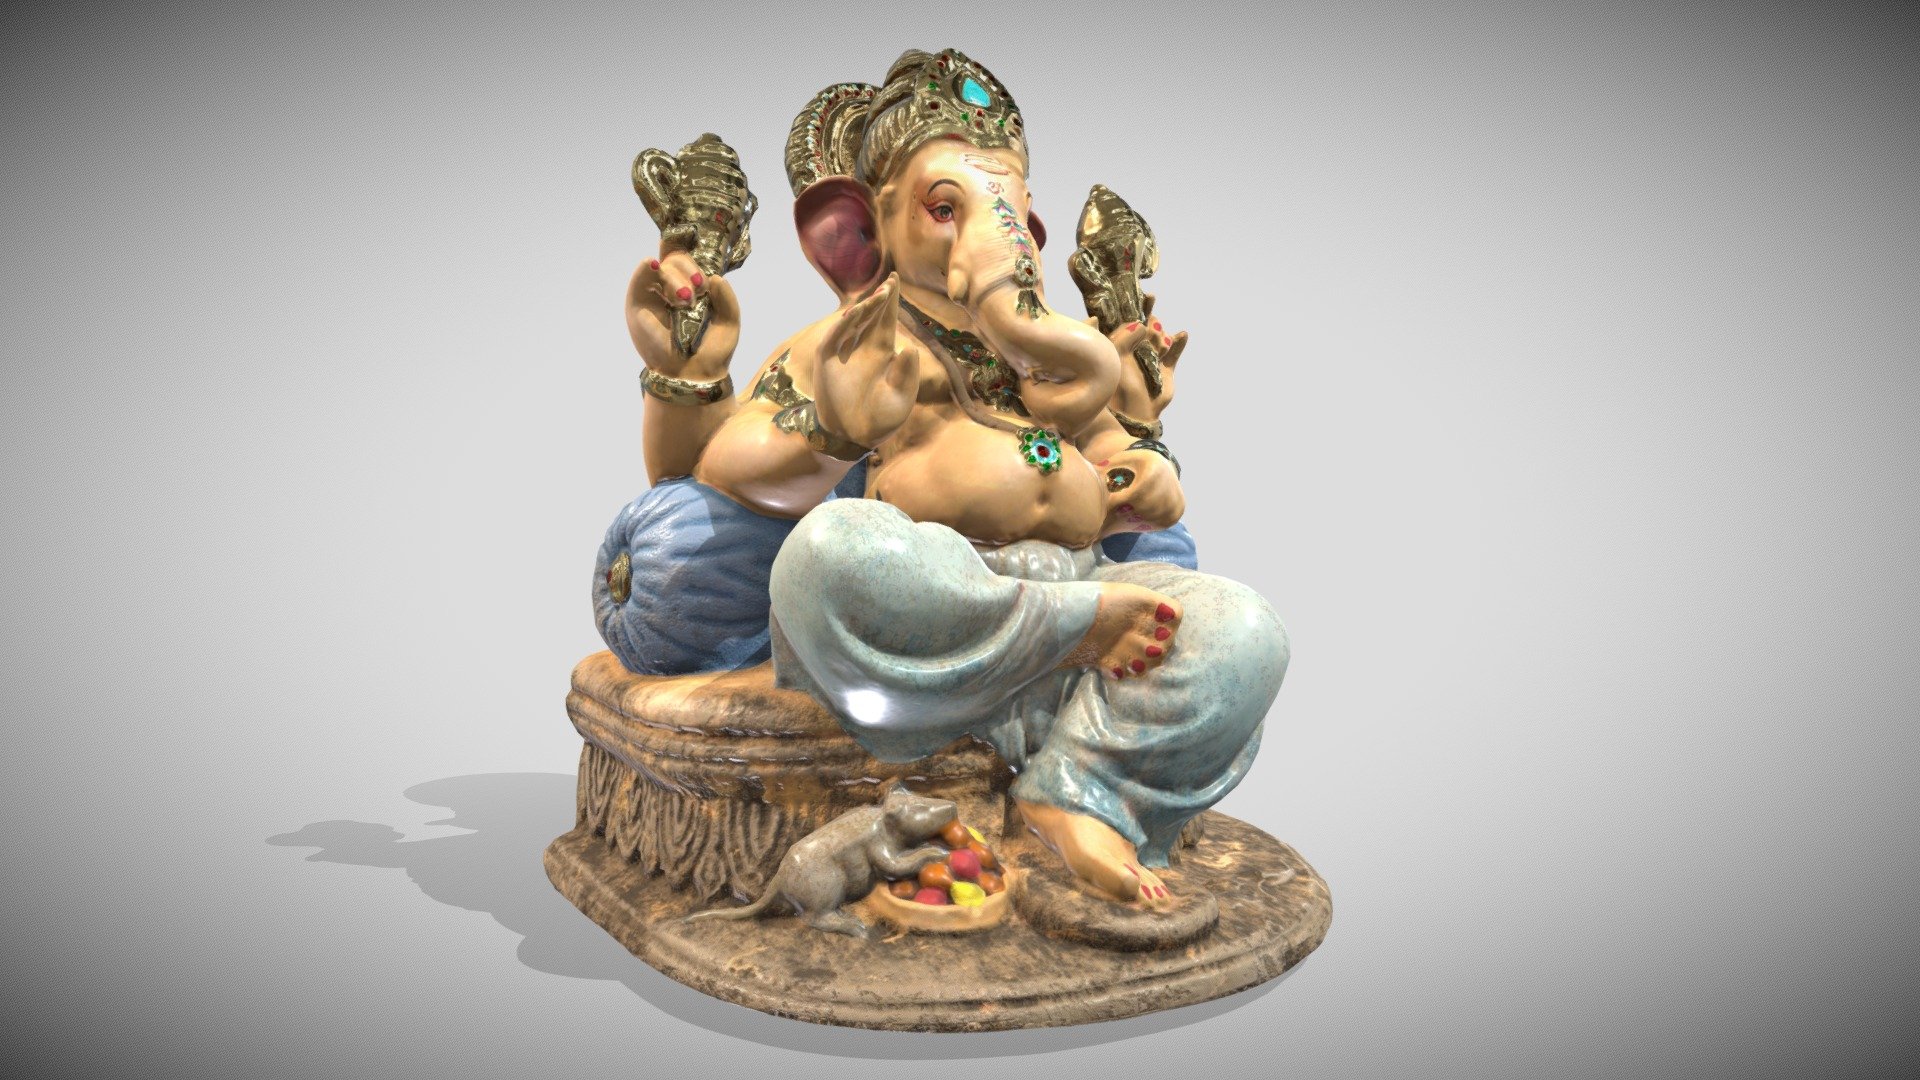 Original very nice 3D scan (https://www.thingiverse.com/thing:2545113) by NeverDun is licensed under the Creative Commons - Attribution license.
http://creativecommons.org/licenses/by/3.0/

Here the Painted LR Gaming Version..... 3d model